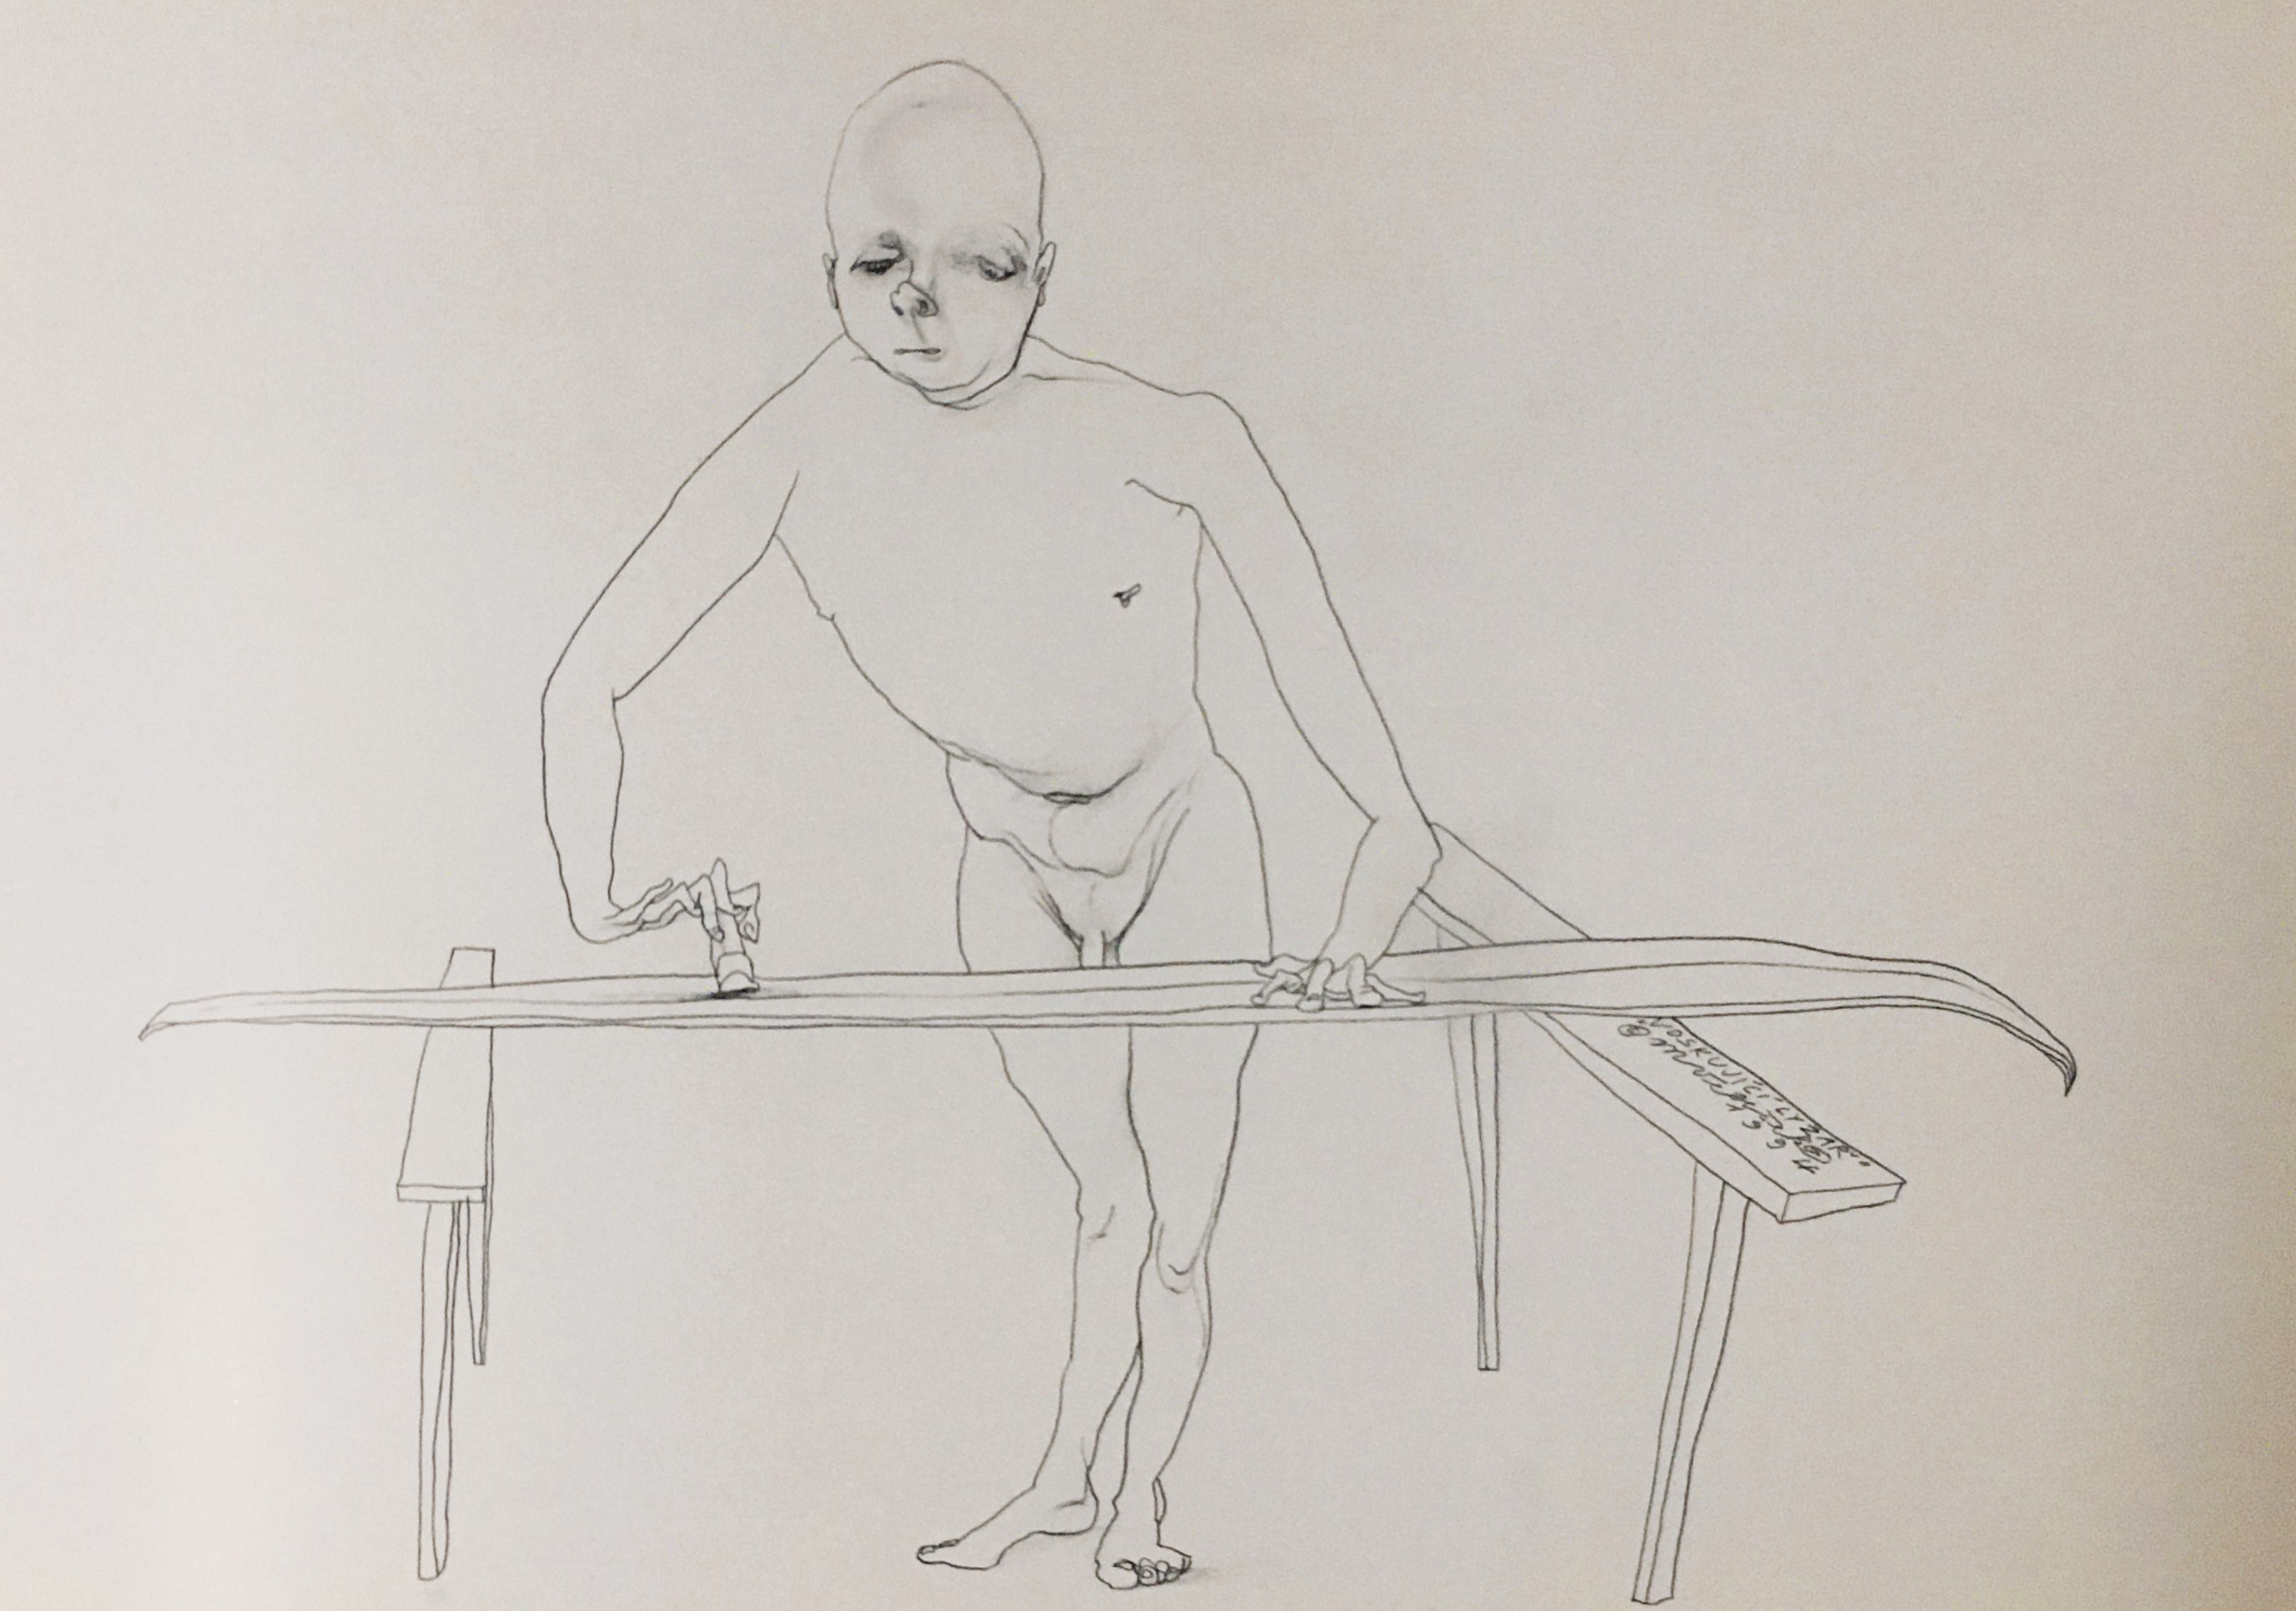 Martin Velíšek, Waxing Skier, drawing from the series Skiers, 1994. Source: Martin Velíšek: Skiers, Argo, 1996